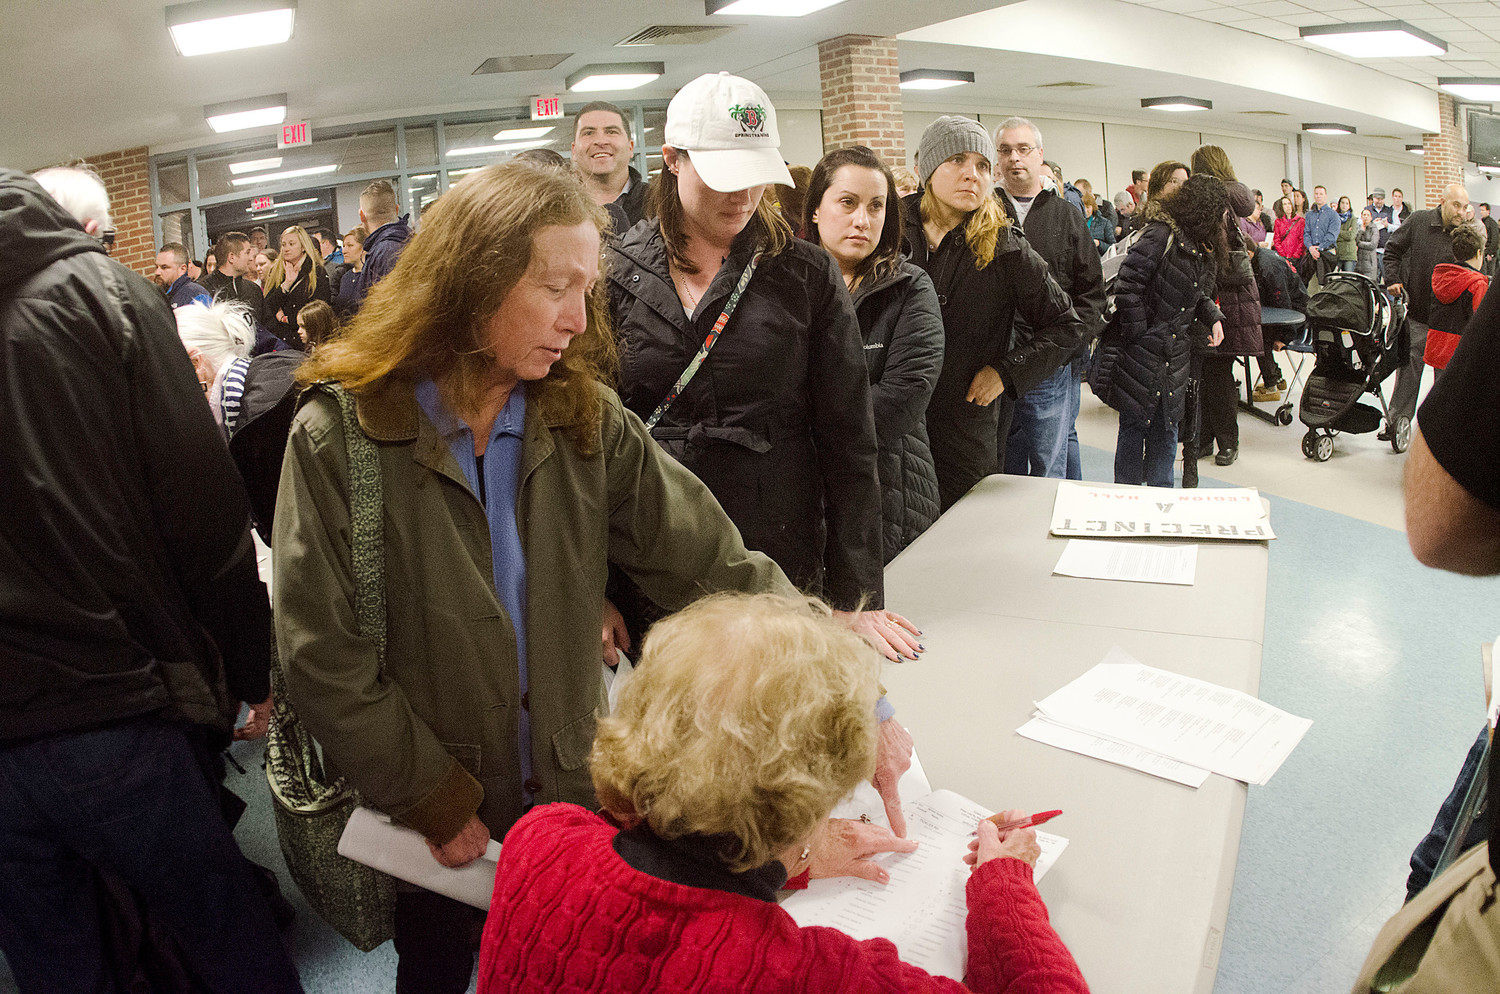 Kathleen Cummings (left) signs in before the meeting. It took over an hour to sign in the 1000 plus voters.